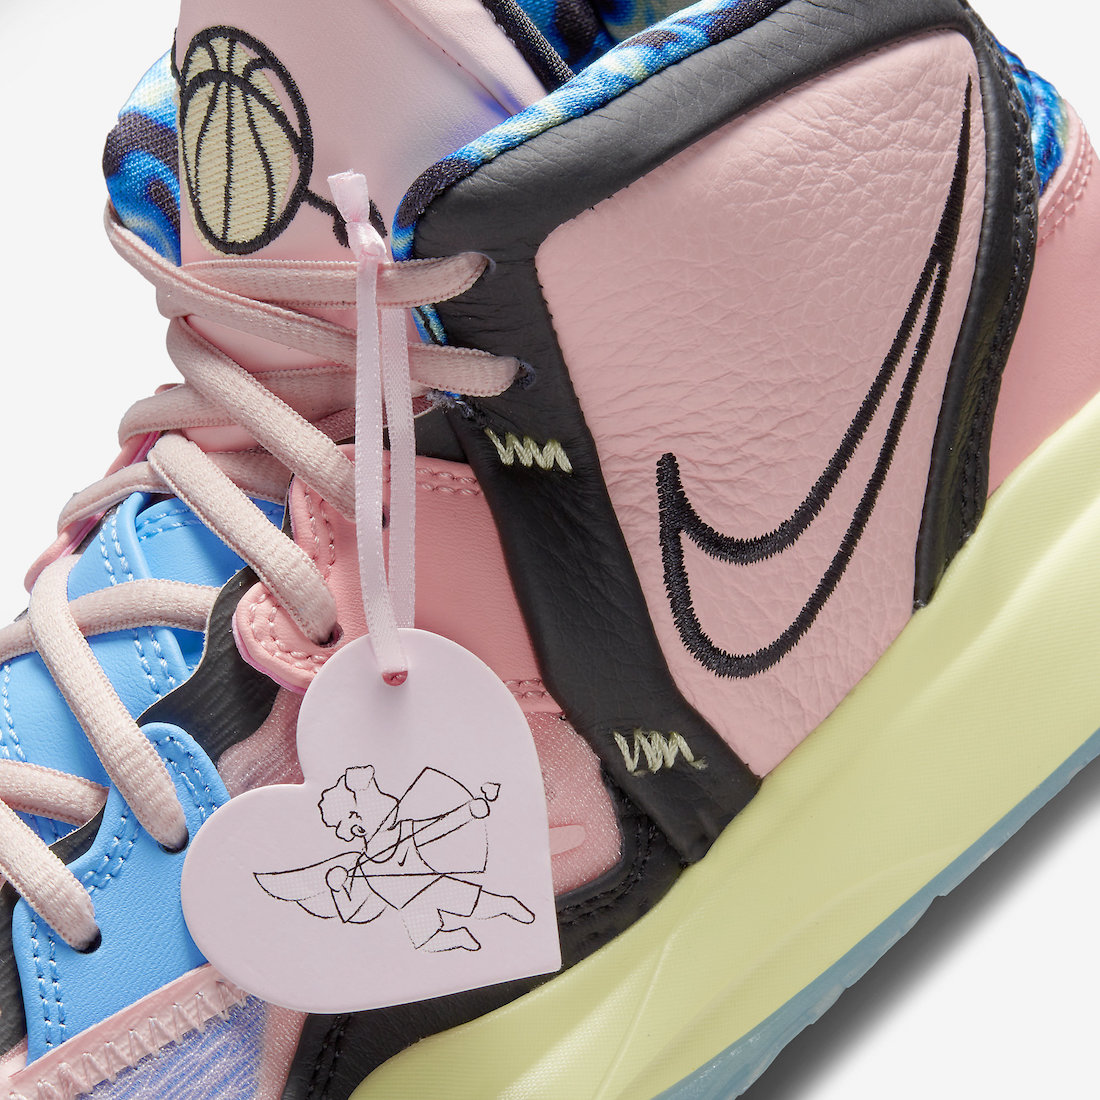 Nike Kyrie 8 Infinity Valentines Day DH5385-900 Release Date